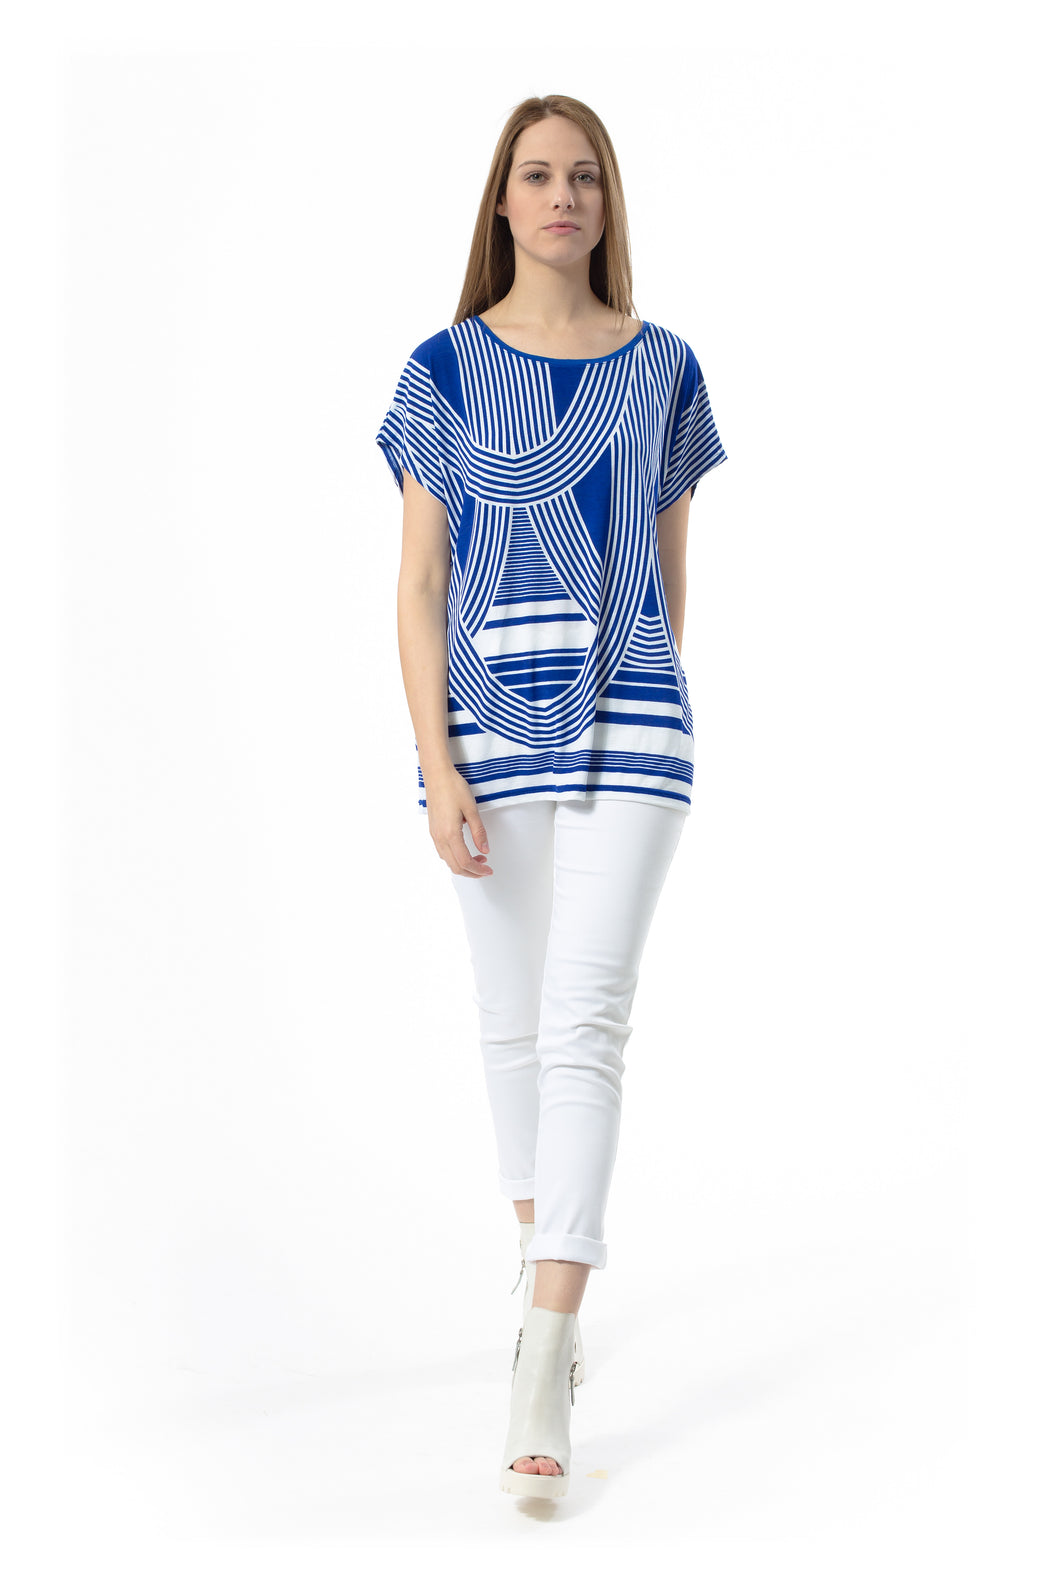 Women's Blue and White Striped Jersey Top